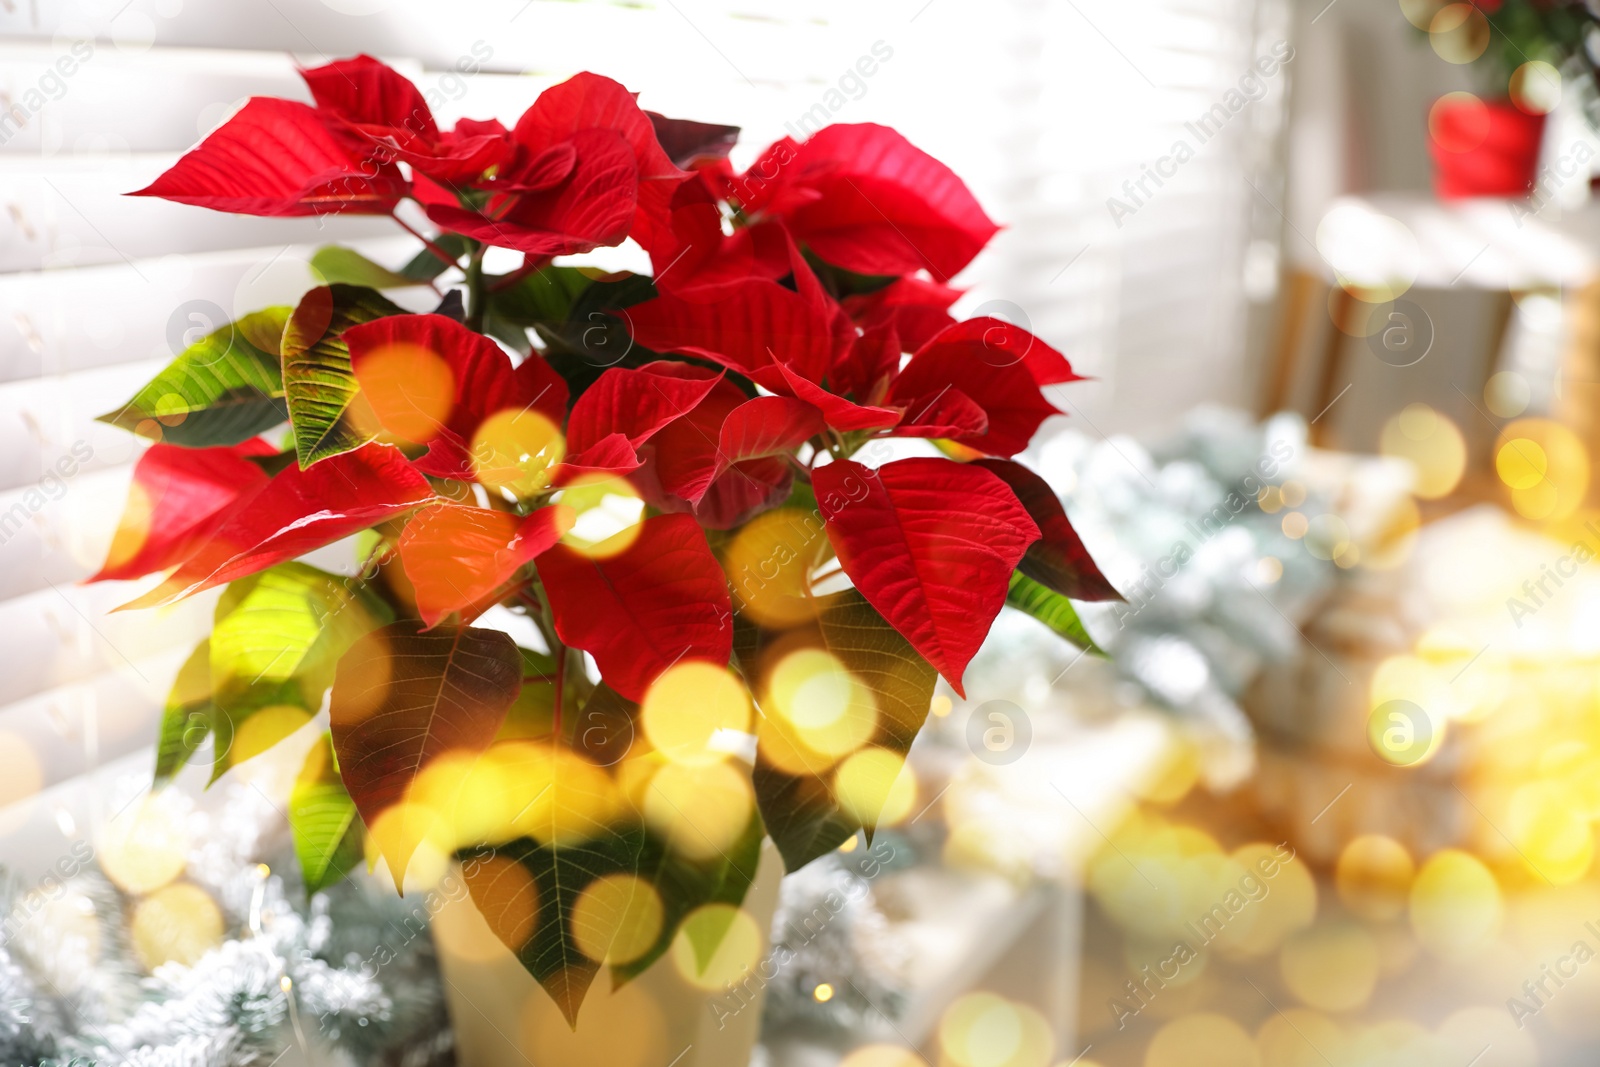 Image of Traditional Christmas poinsettia flower near window. Bokeh effect on foreground